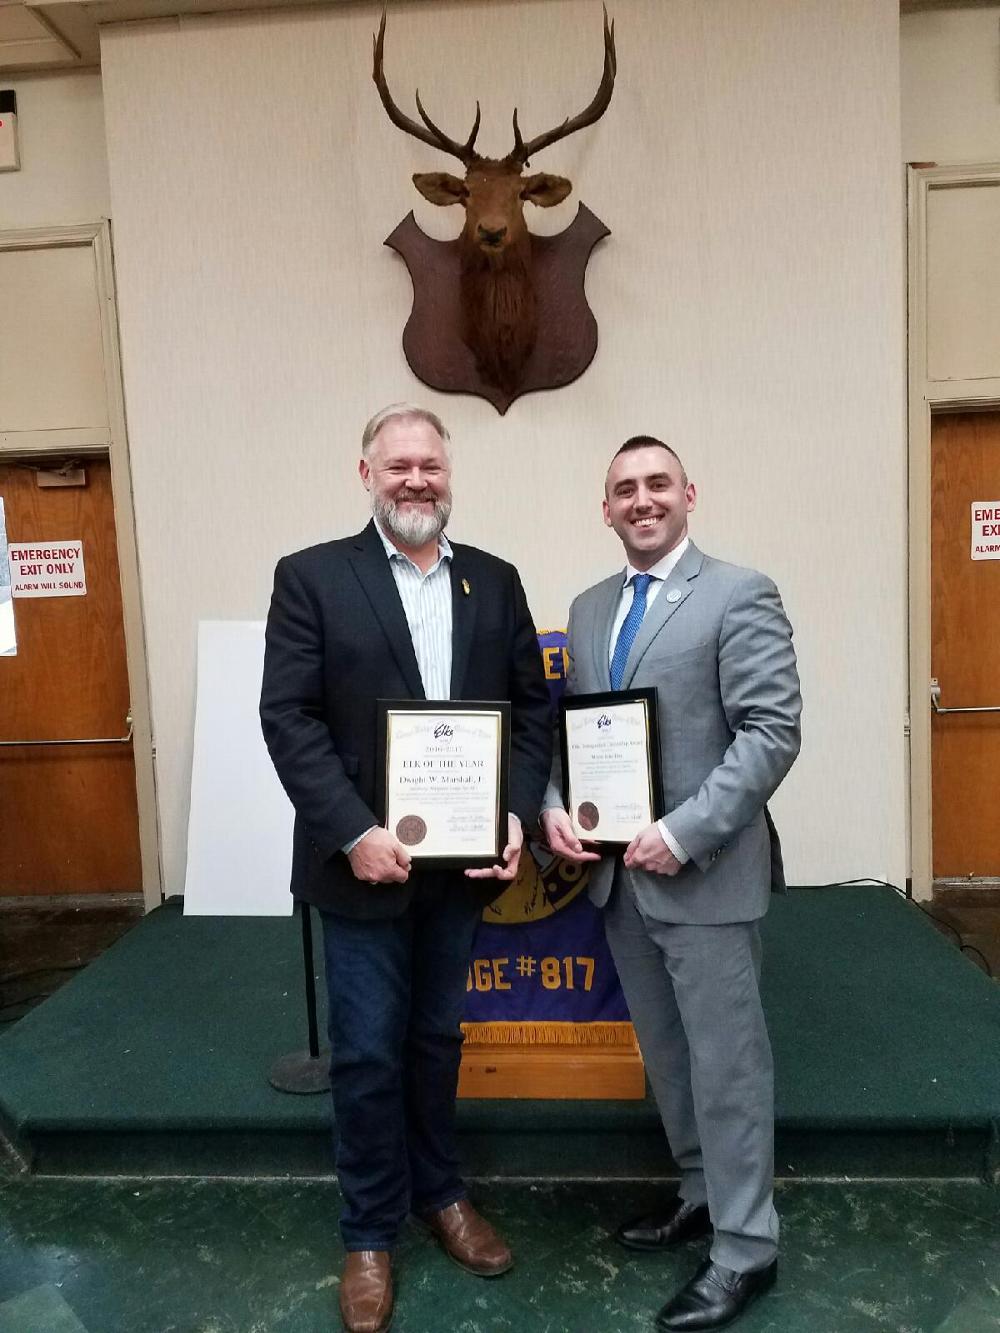 Elk of the Year - Duke Marshall and Citizen of the Year - Mayor Jake Day